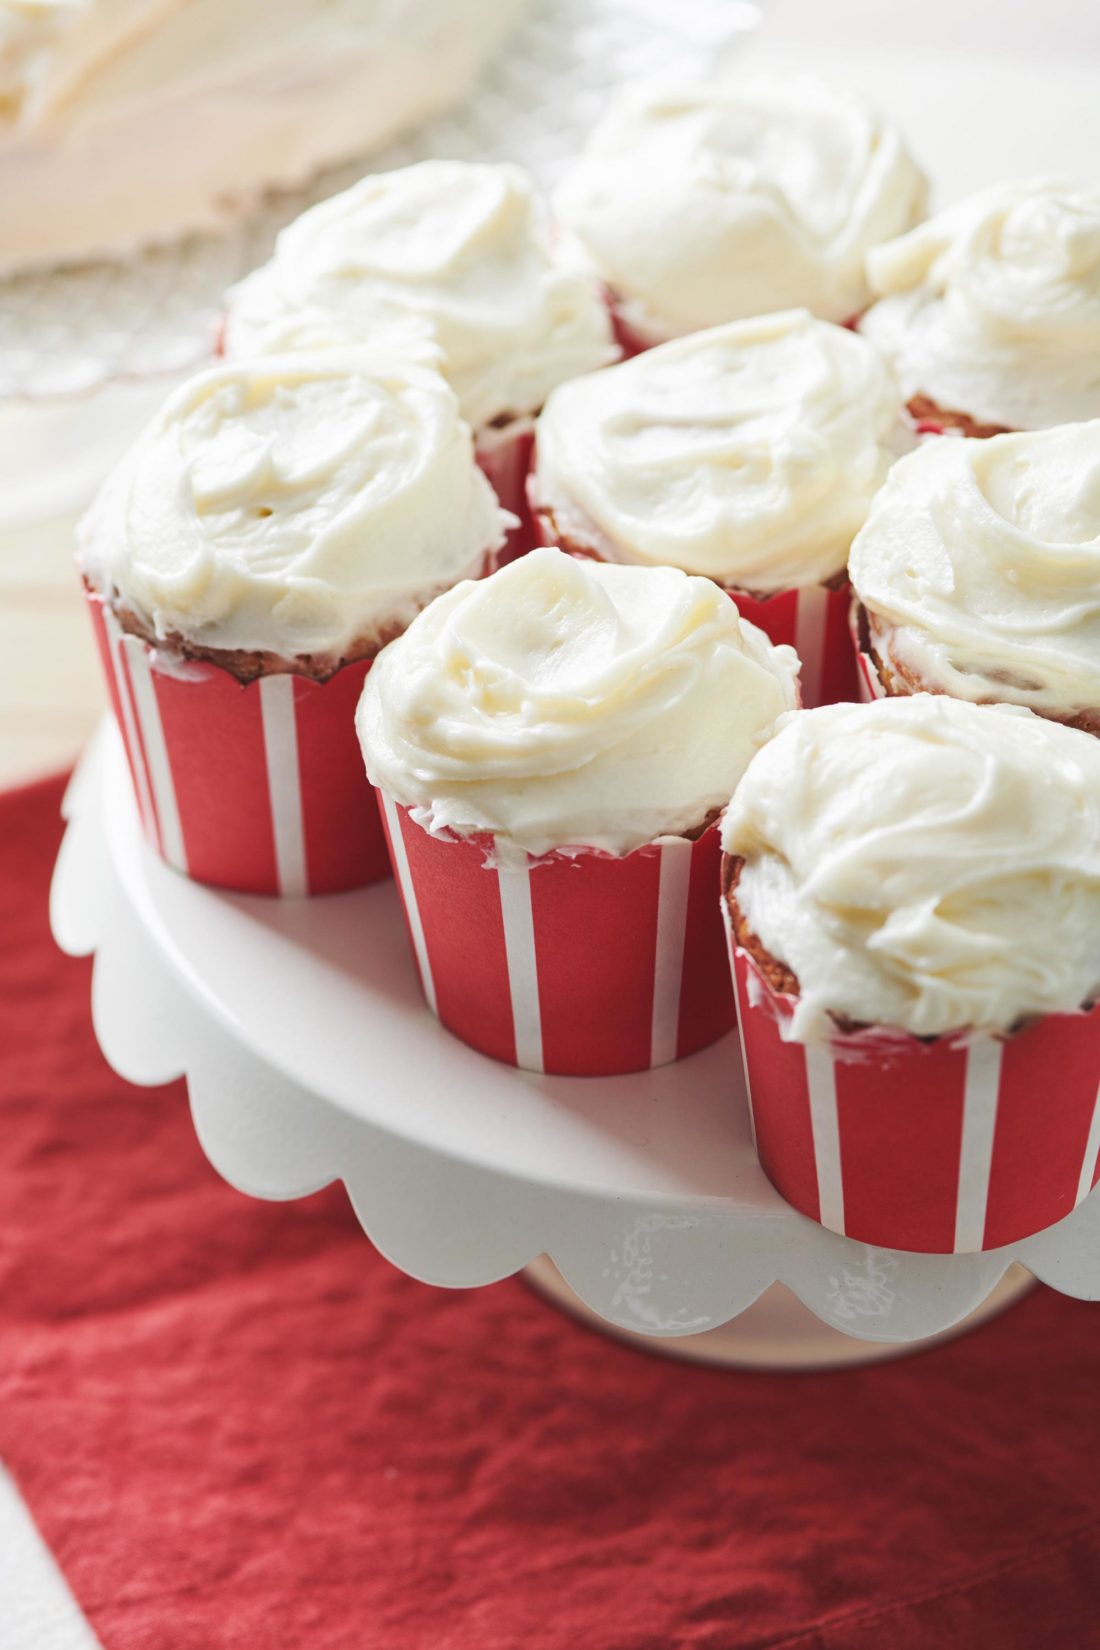 Elevated platter of Banana Cupcakes with Cream Cheese Frosting.